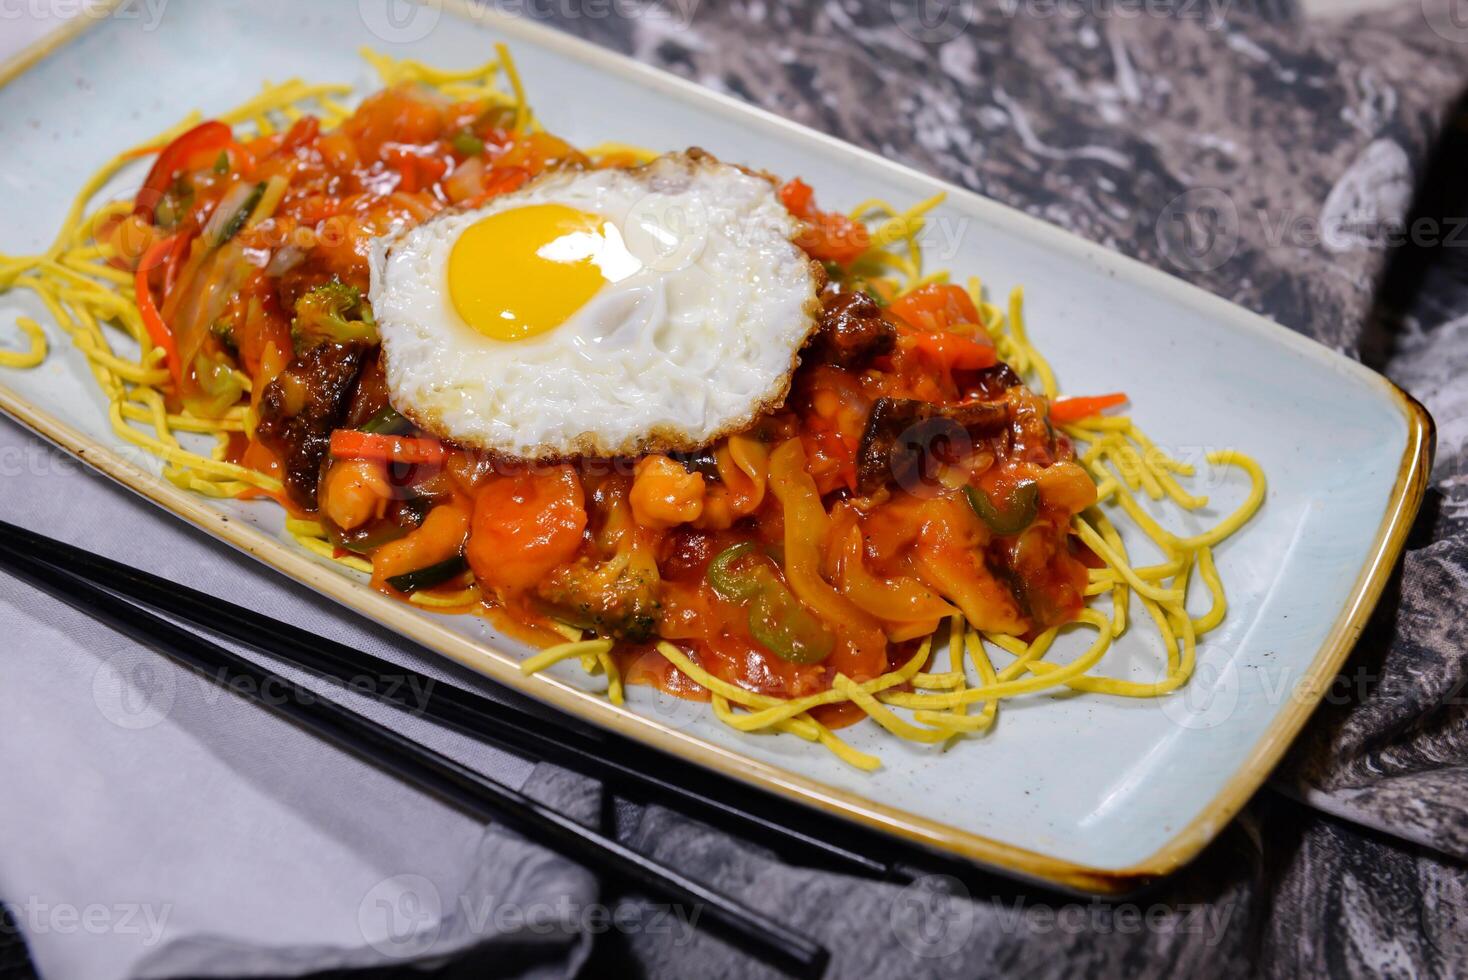 American Chopsuey with sunny side up egg, noodles, vegetables and chicken served in dish isolated on food table top view of middle east spices photo